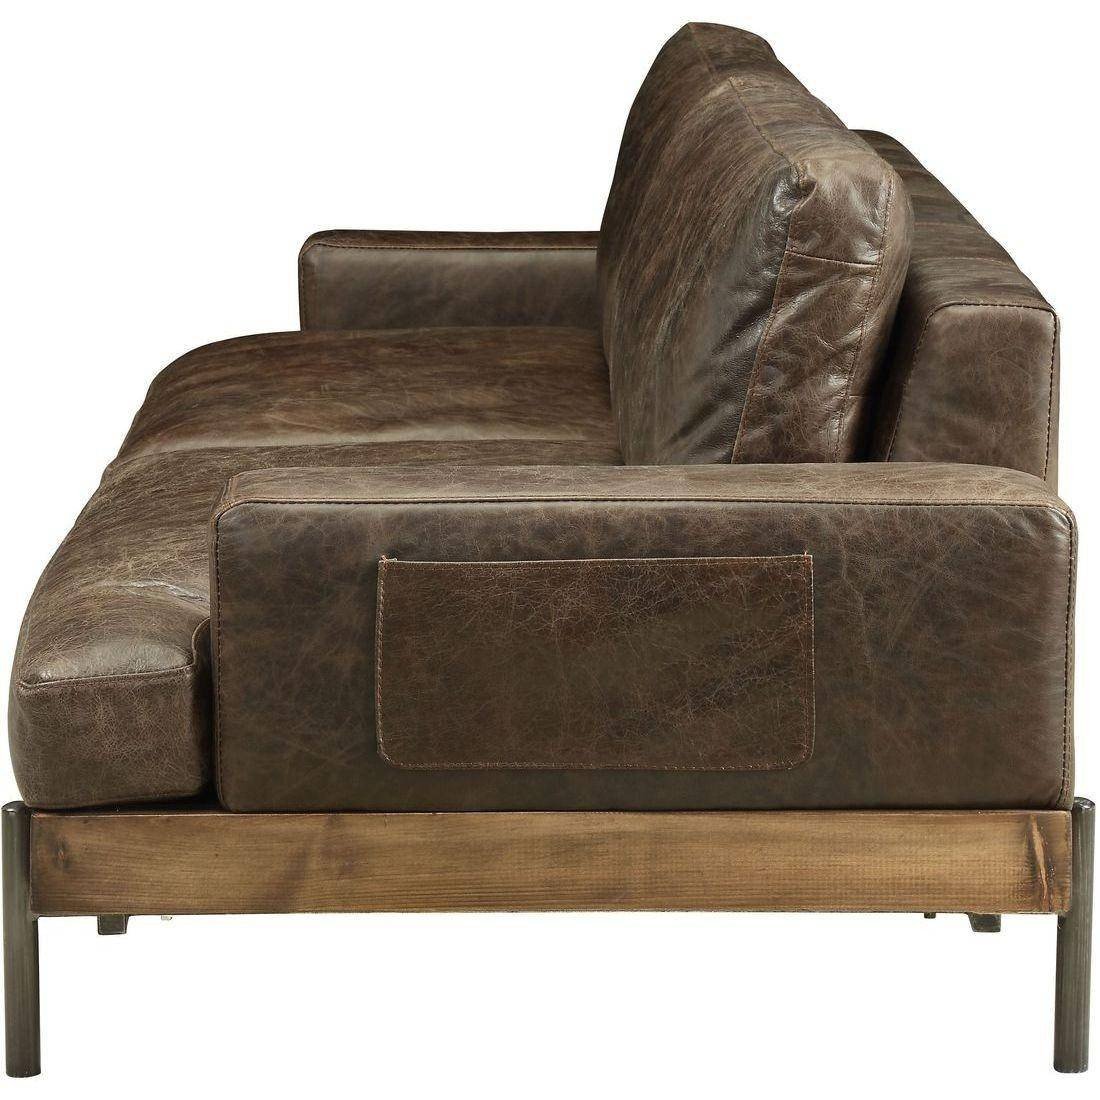 Industrial Style Bedroom Furniture Fresh top Grain Leather Oak Chocolate sofa Silchester Acme